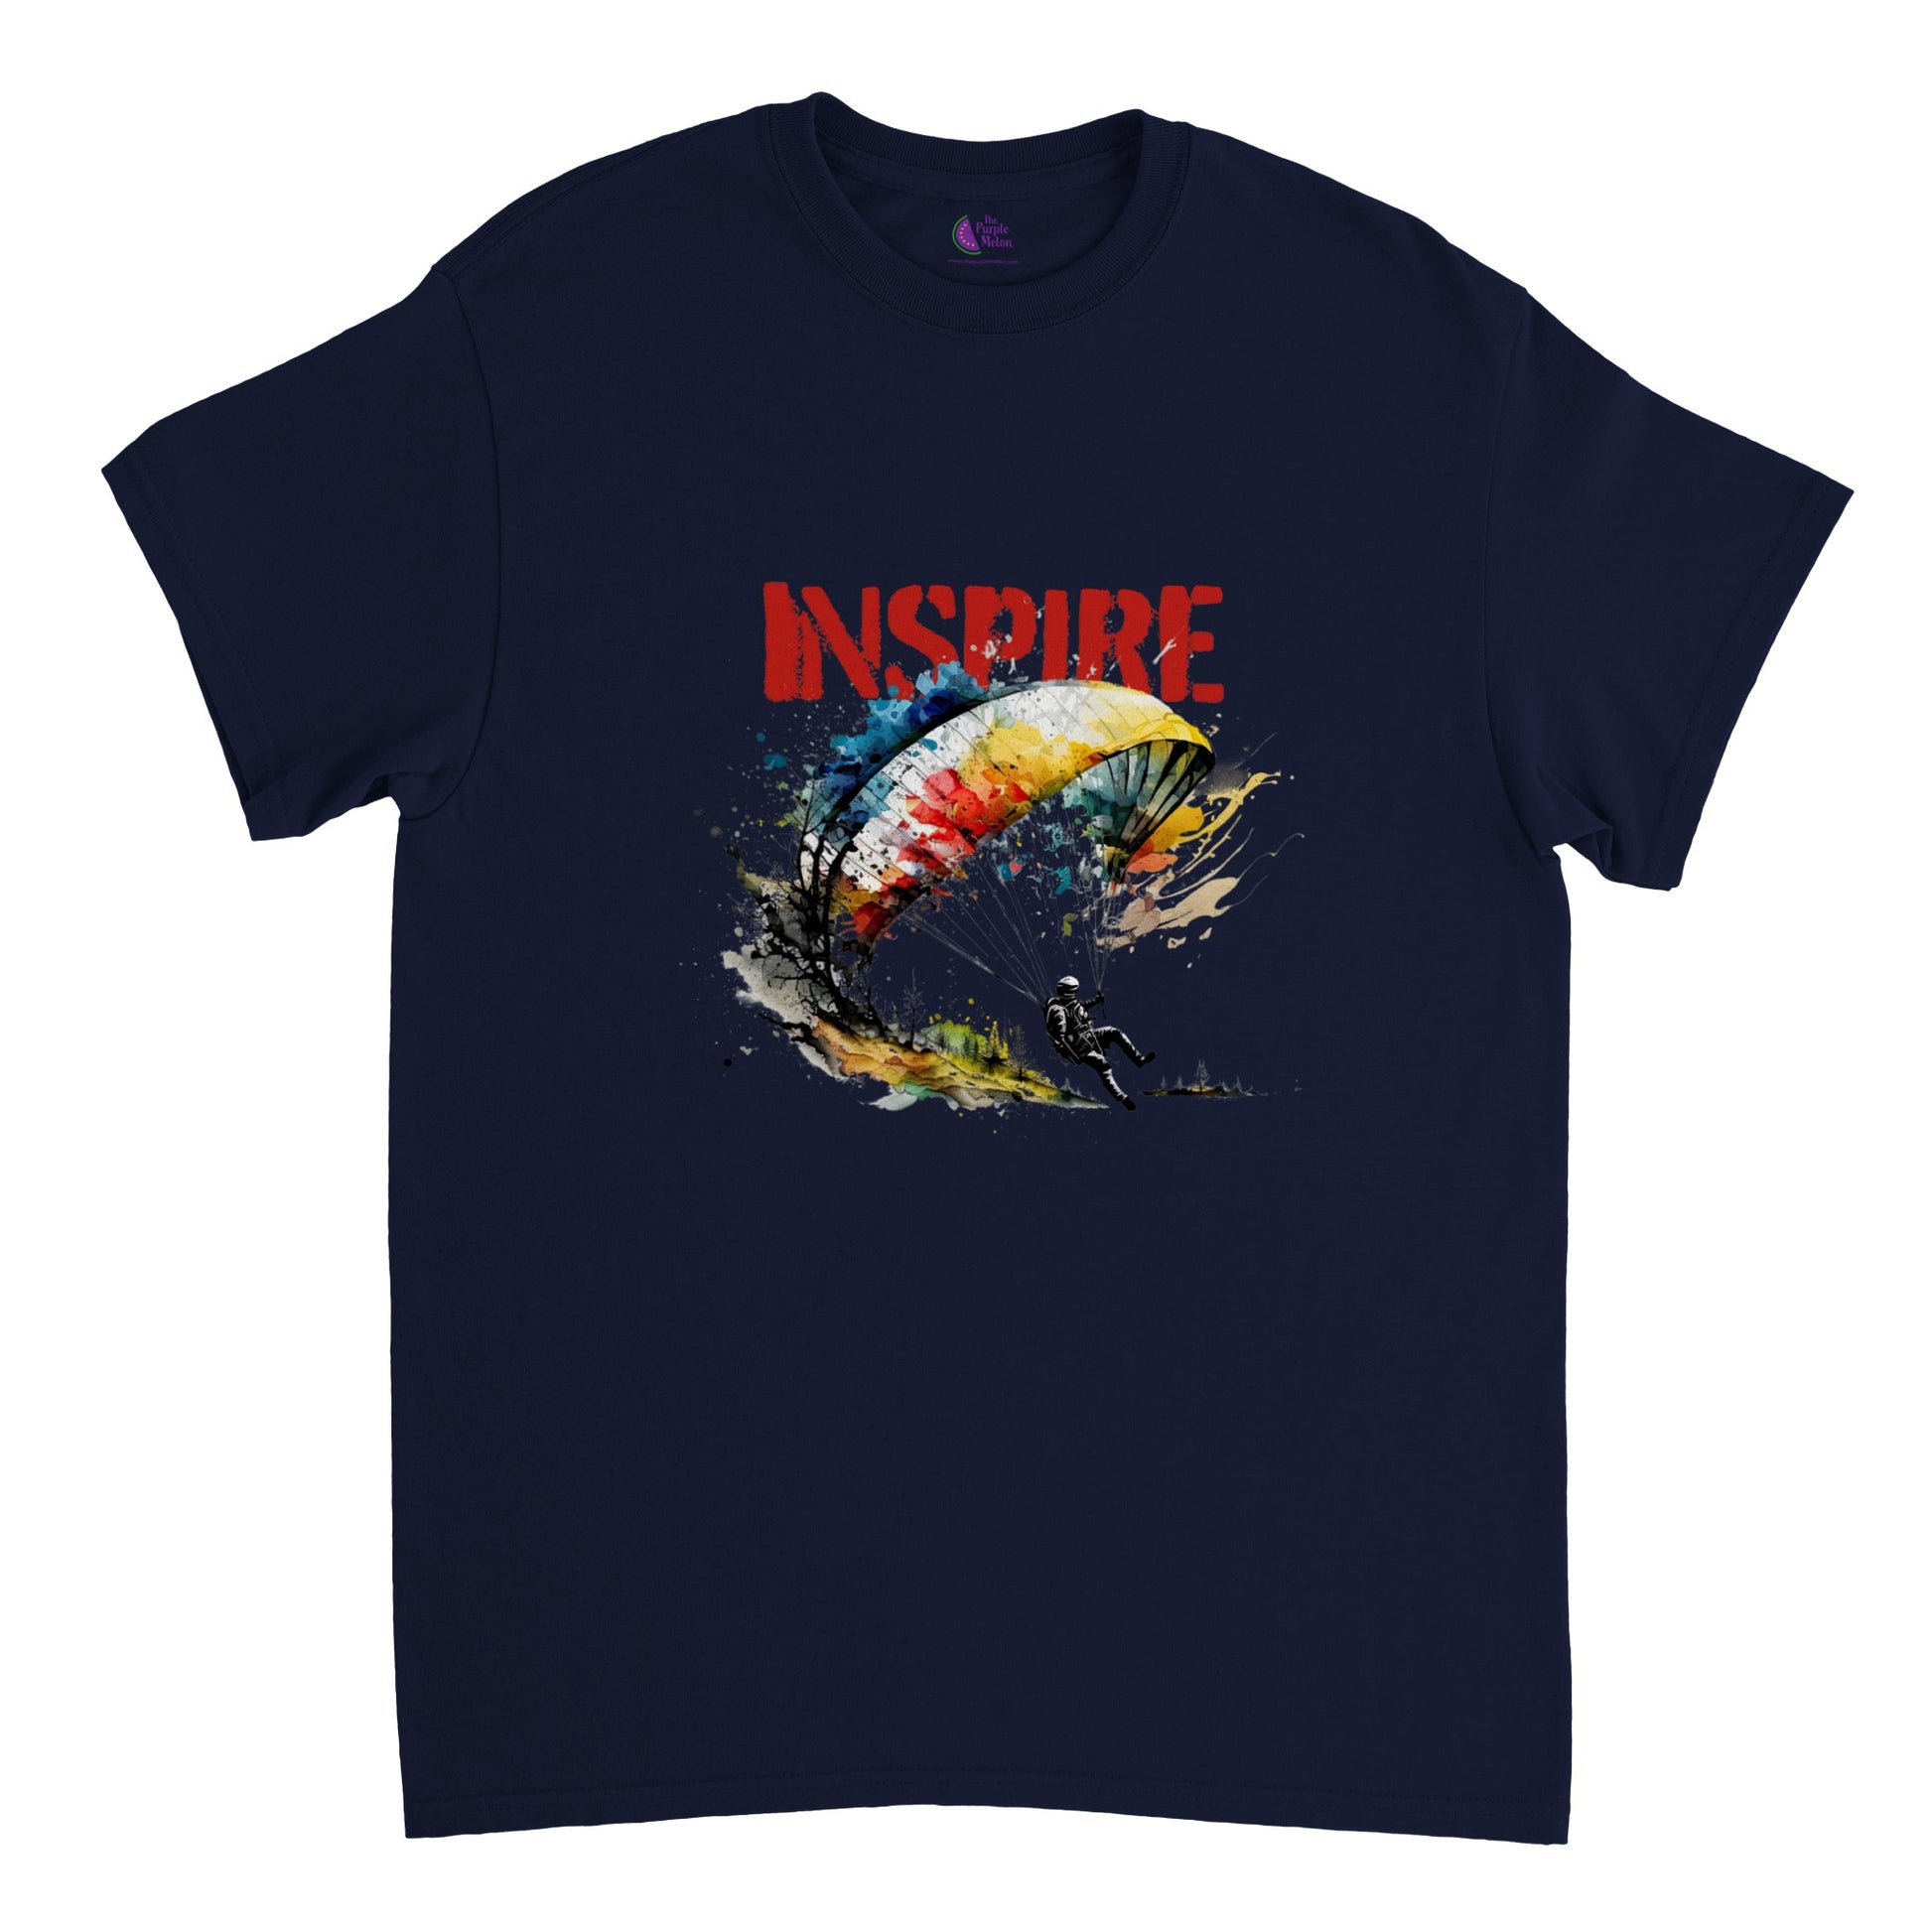 Navy blue t-shirt with a paraglider print and the caption inspire